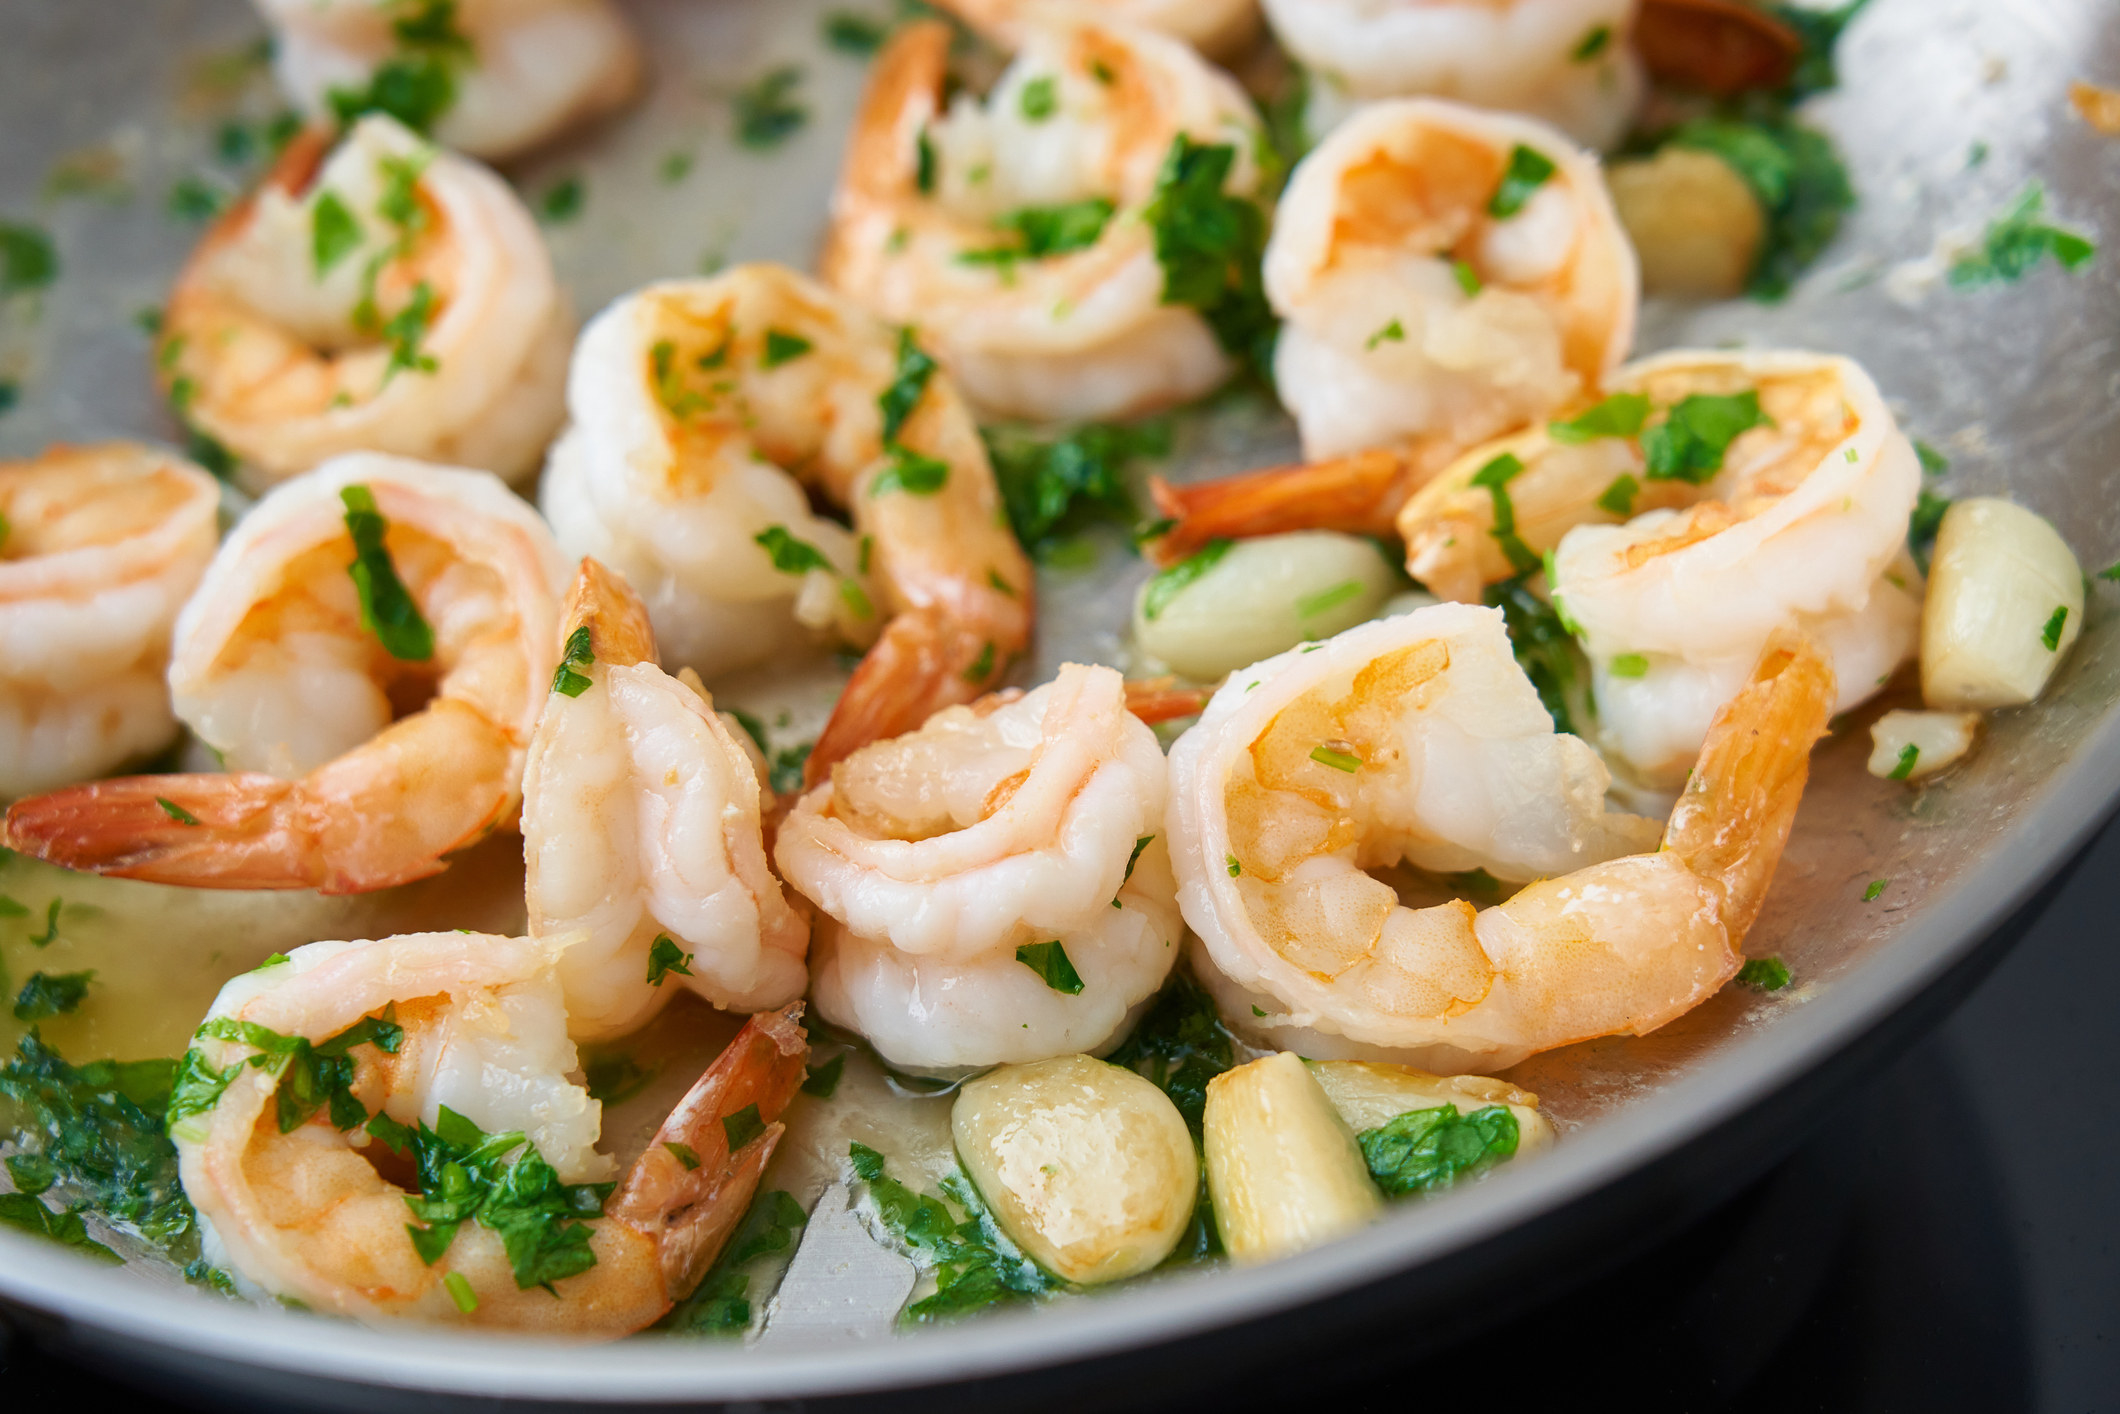 Shrimp with garlic and parsley